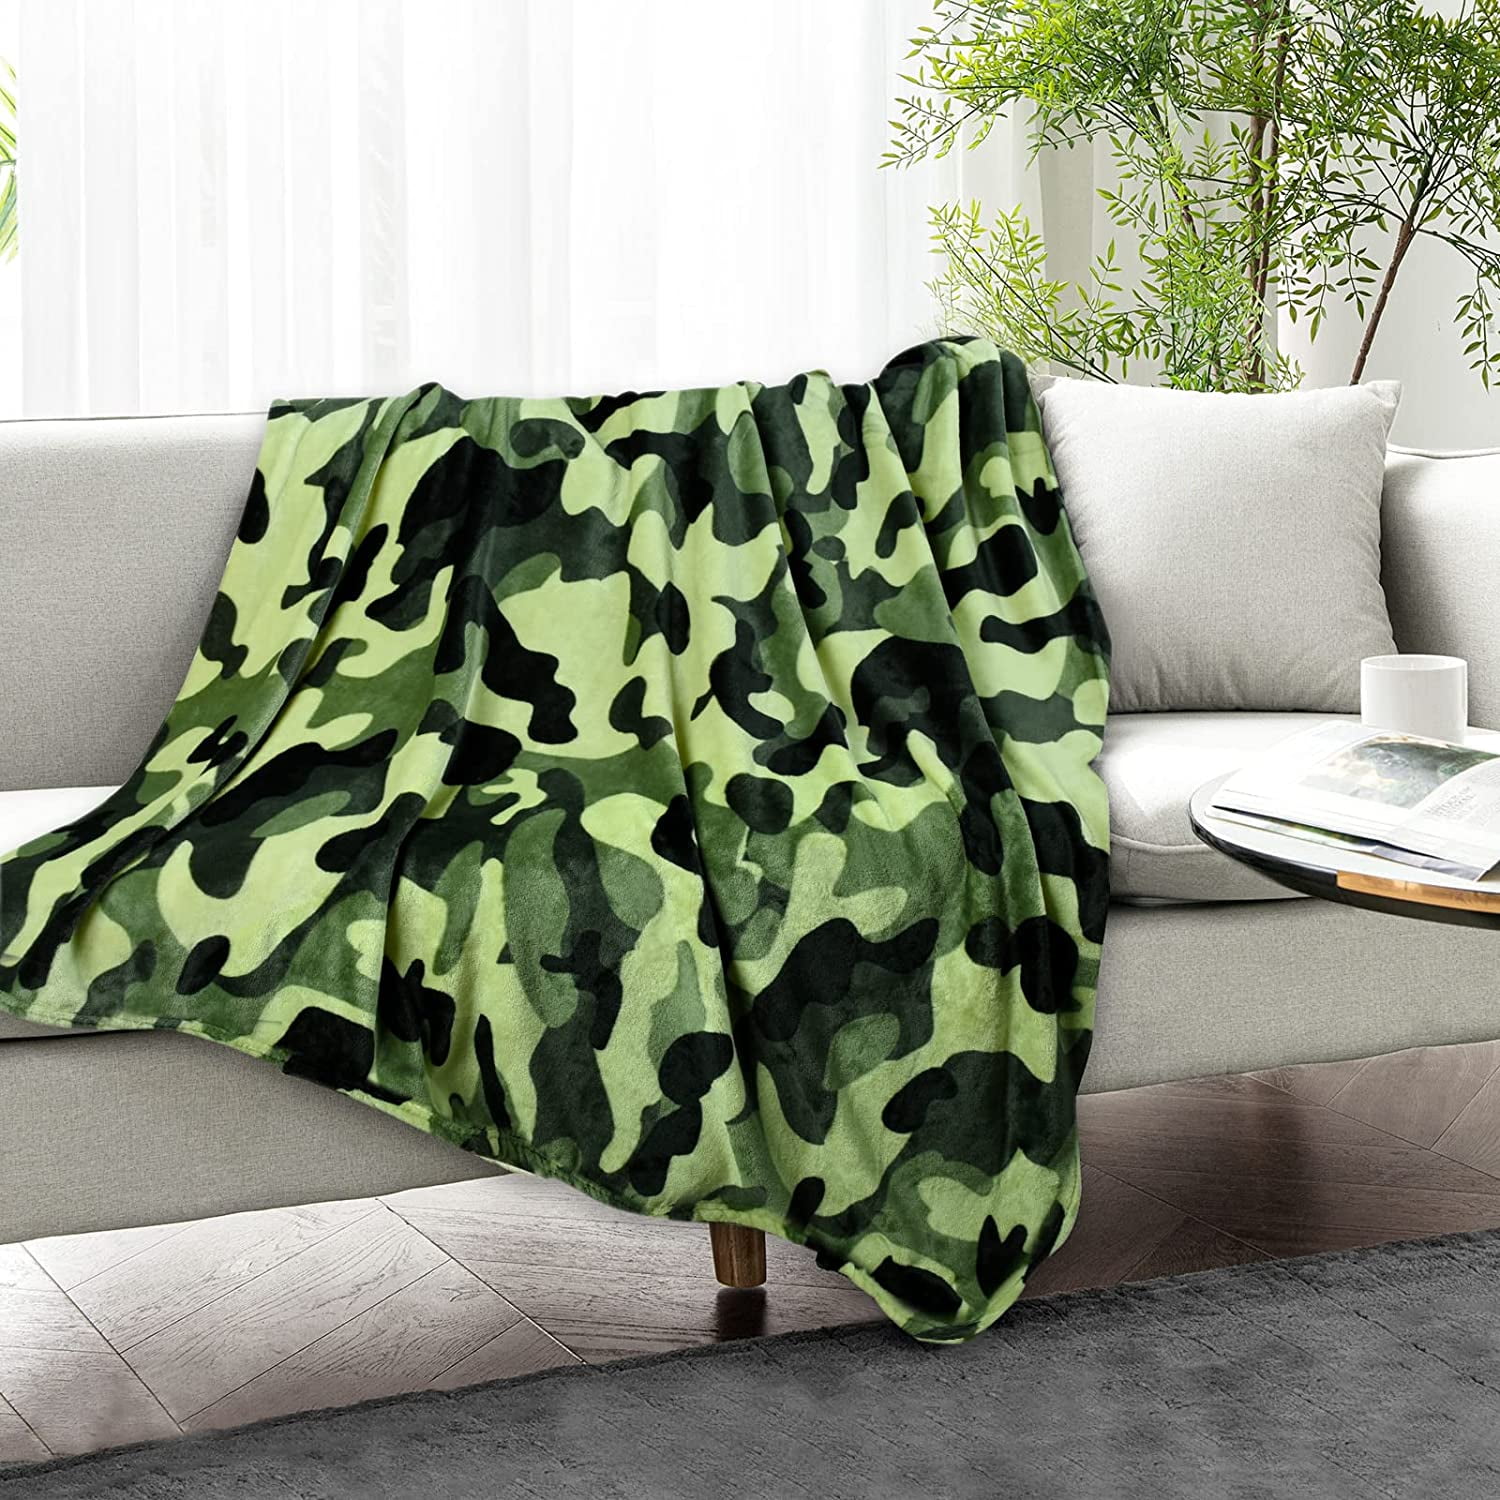 Camouflage Blanket 50x60 Inch Soft Camo Throw Blanket for Military